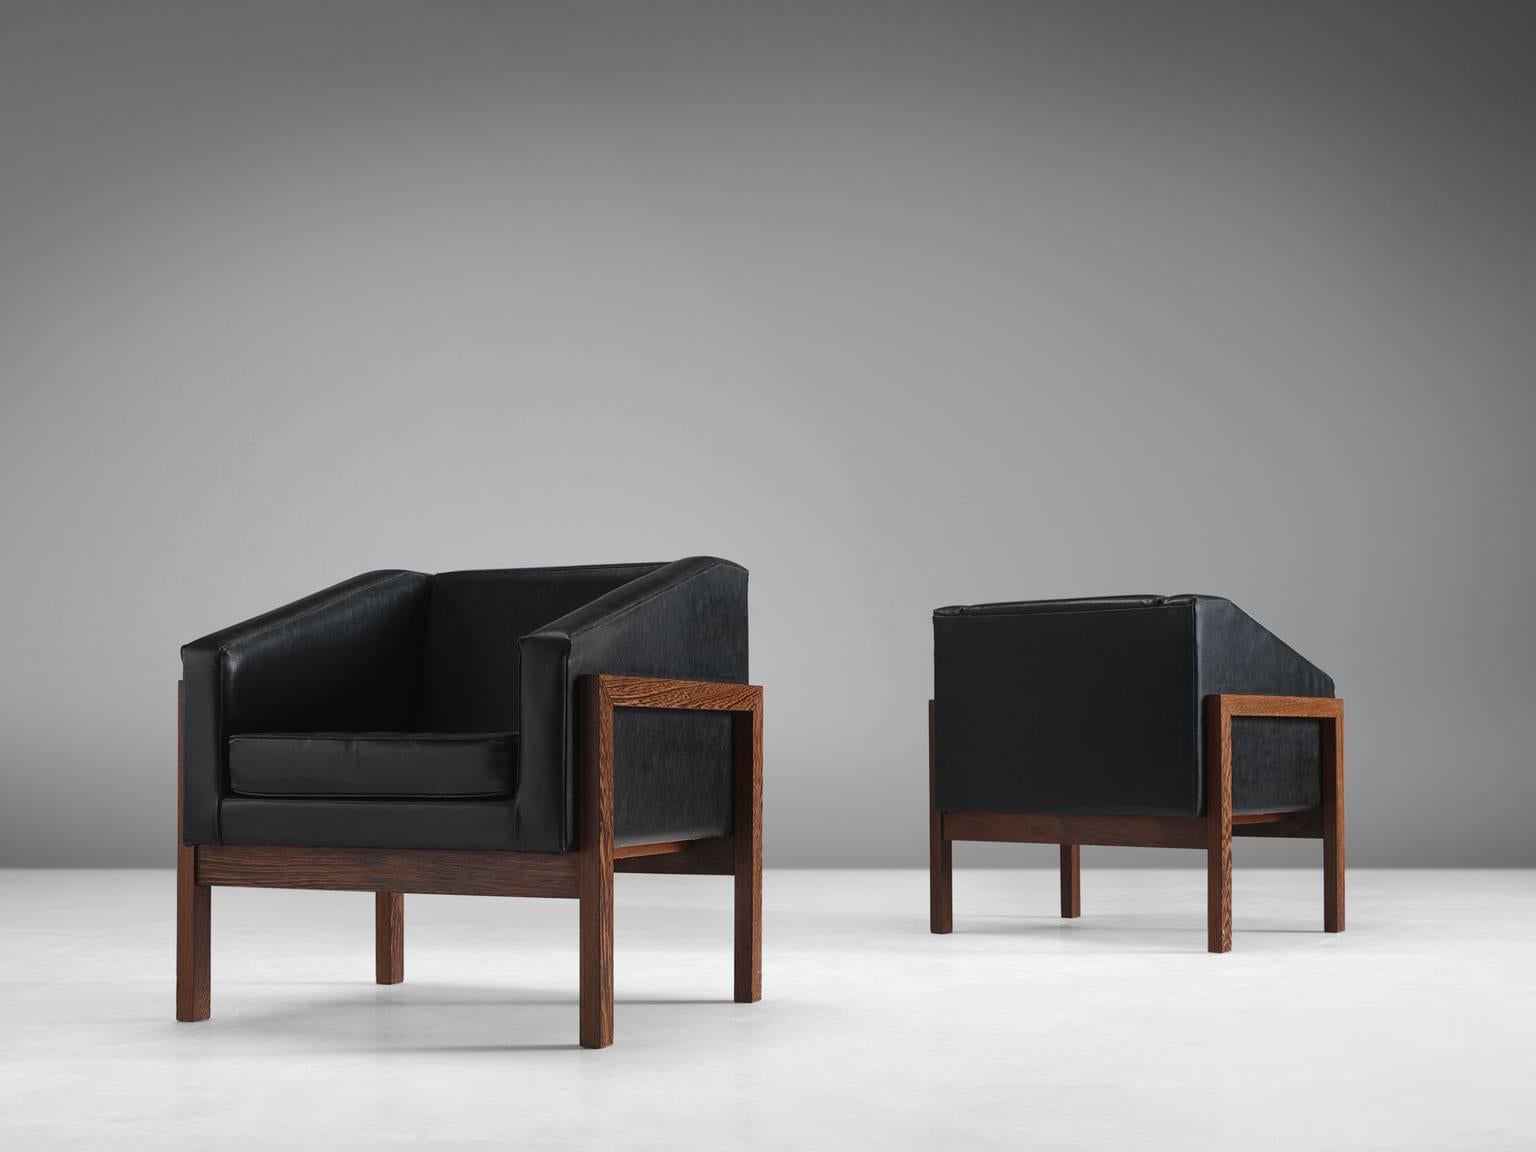 Wim Den Boom, set of lounge chairs, black faux leather, wenge, the Netherlands, 1960.

This set of office chairs is designed by Wim Den Boon voor a Dutch client from The Hague. The monumental chairs are a one of a kind as they are especially